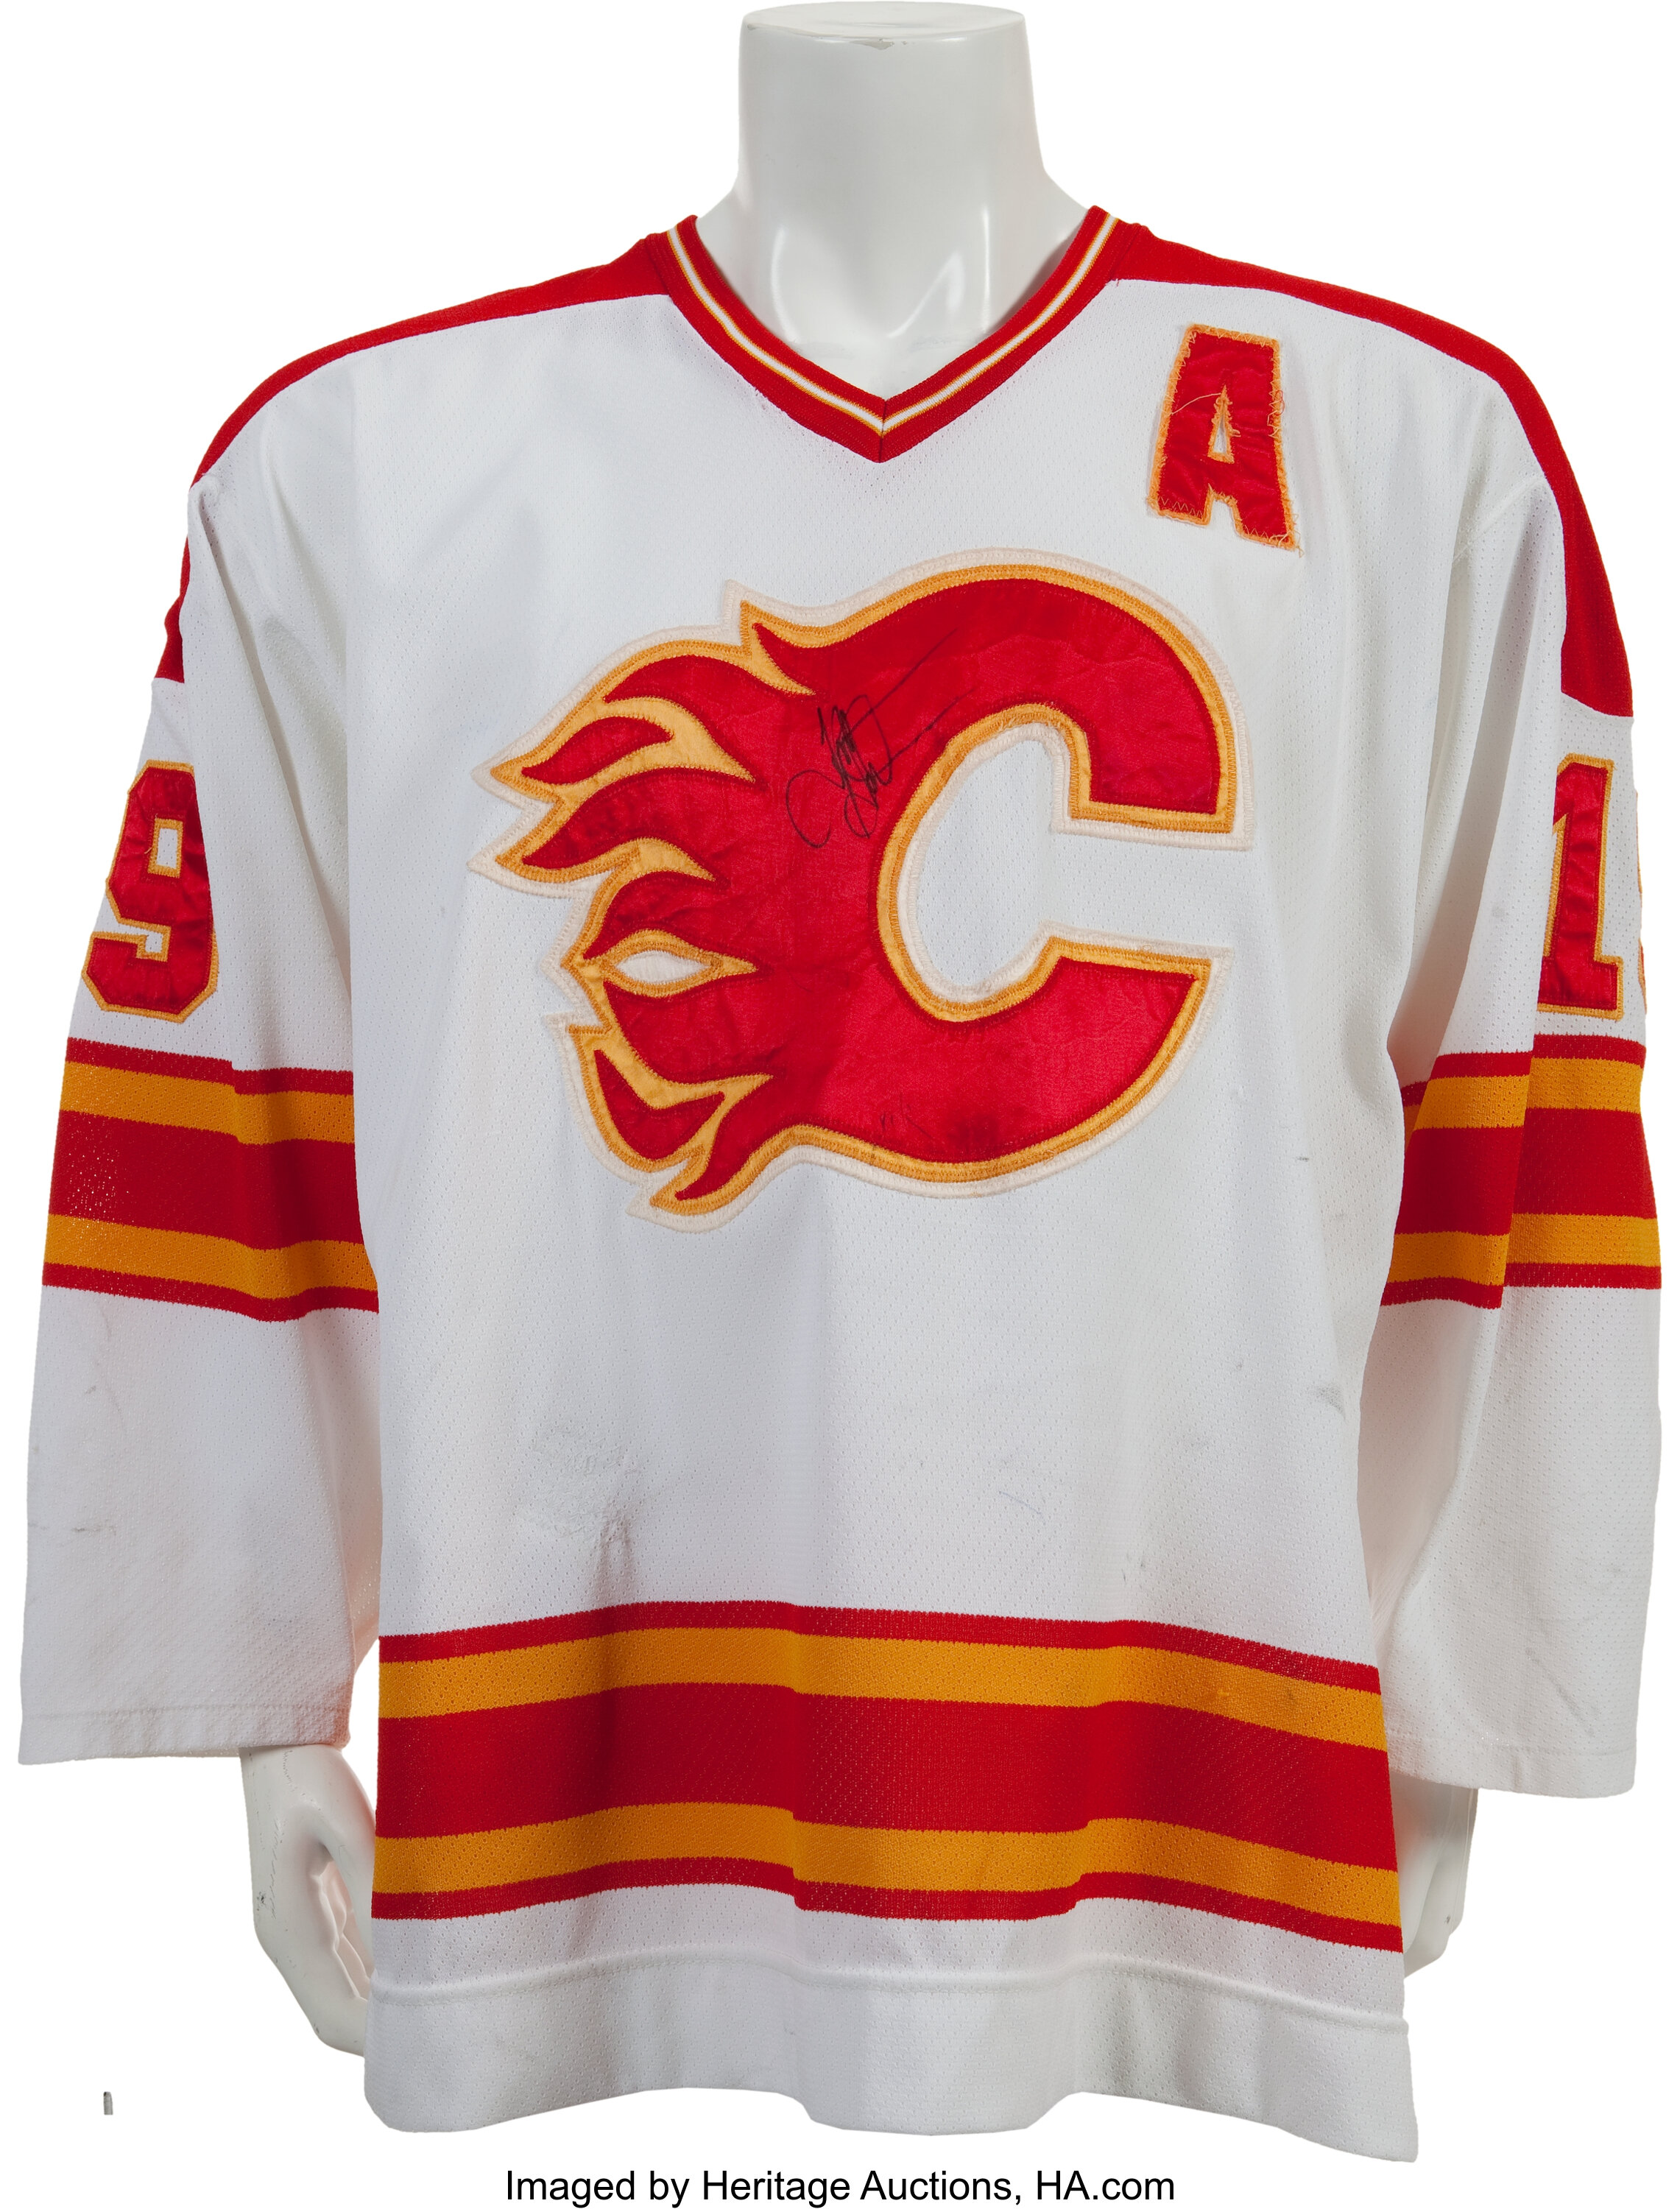 1989 Calgary Flames 13 Player Team Signed Stanley Cup Jersey #/89